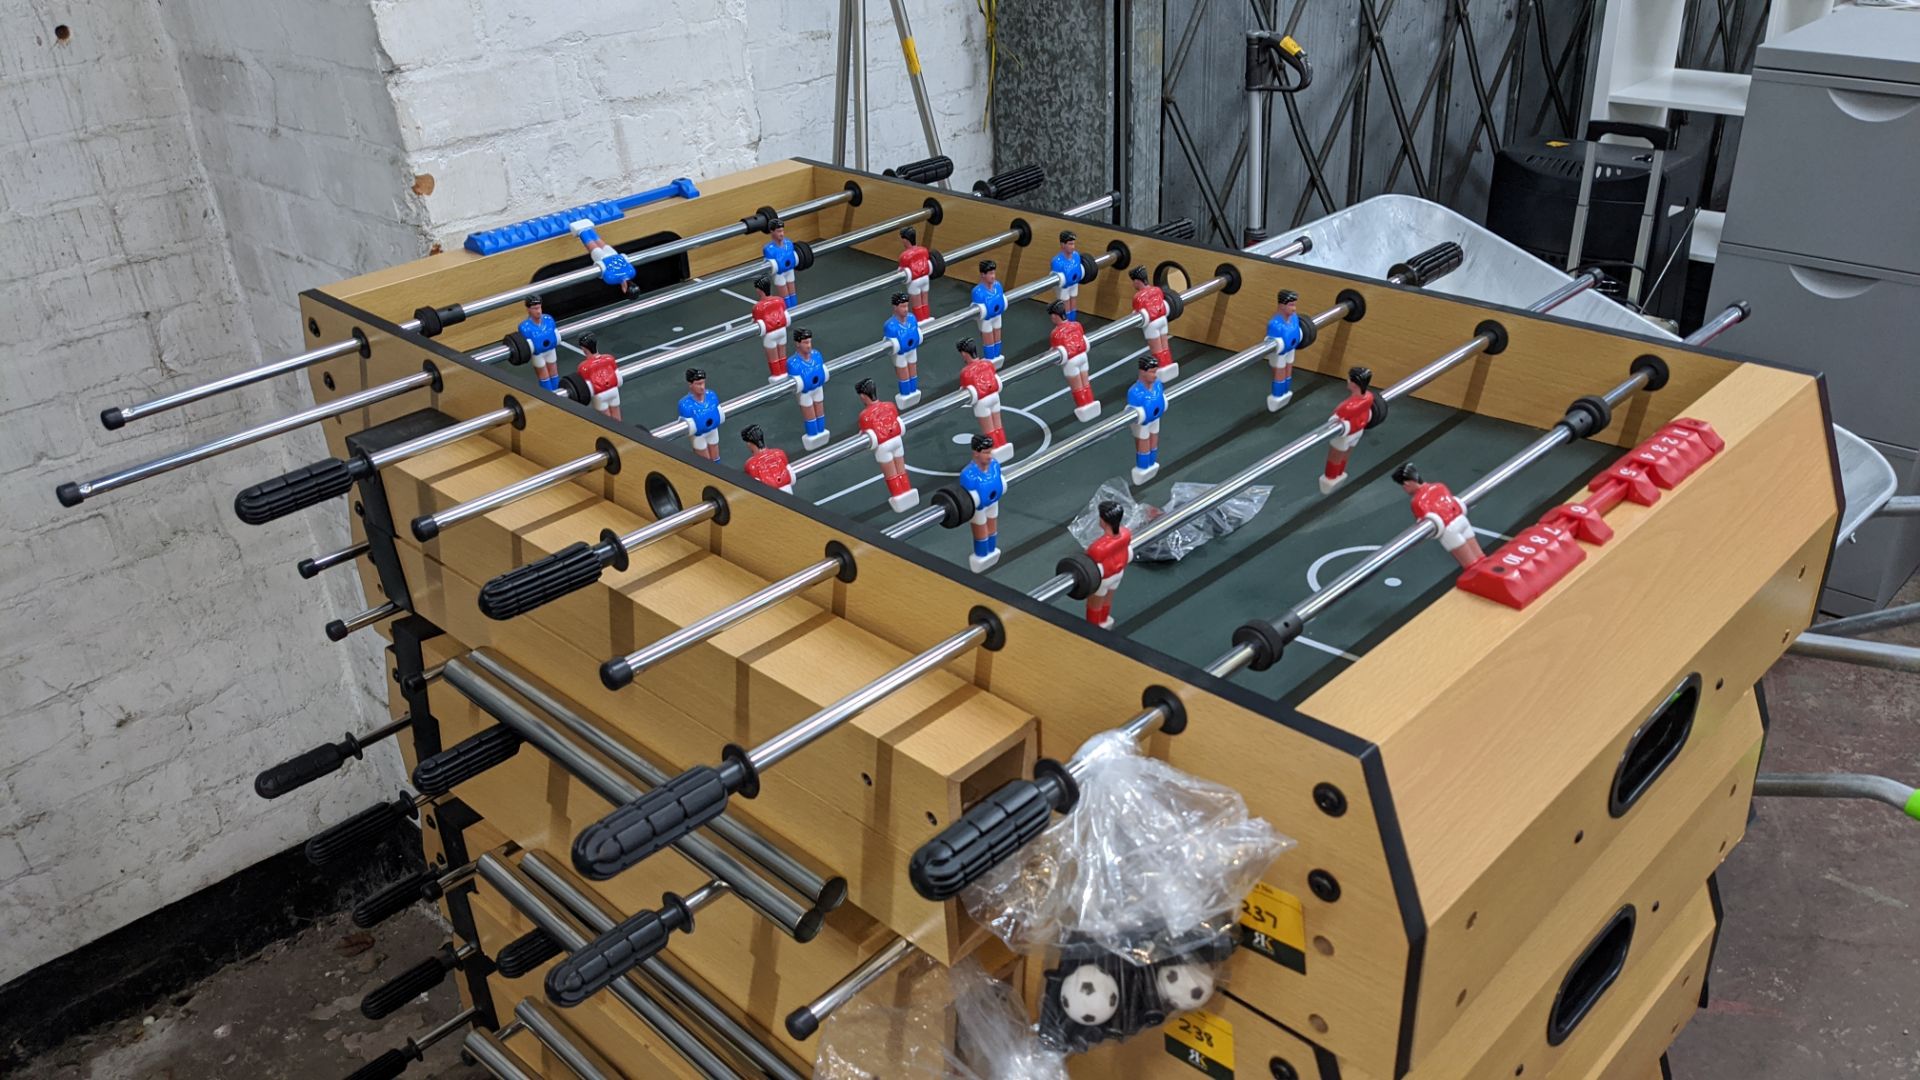 Gemini table football game including 2 footballs & bolts to screw legs on. This is one of a number